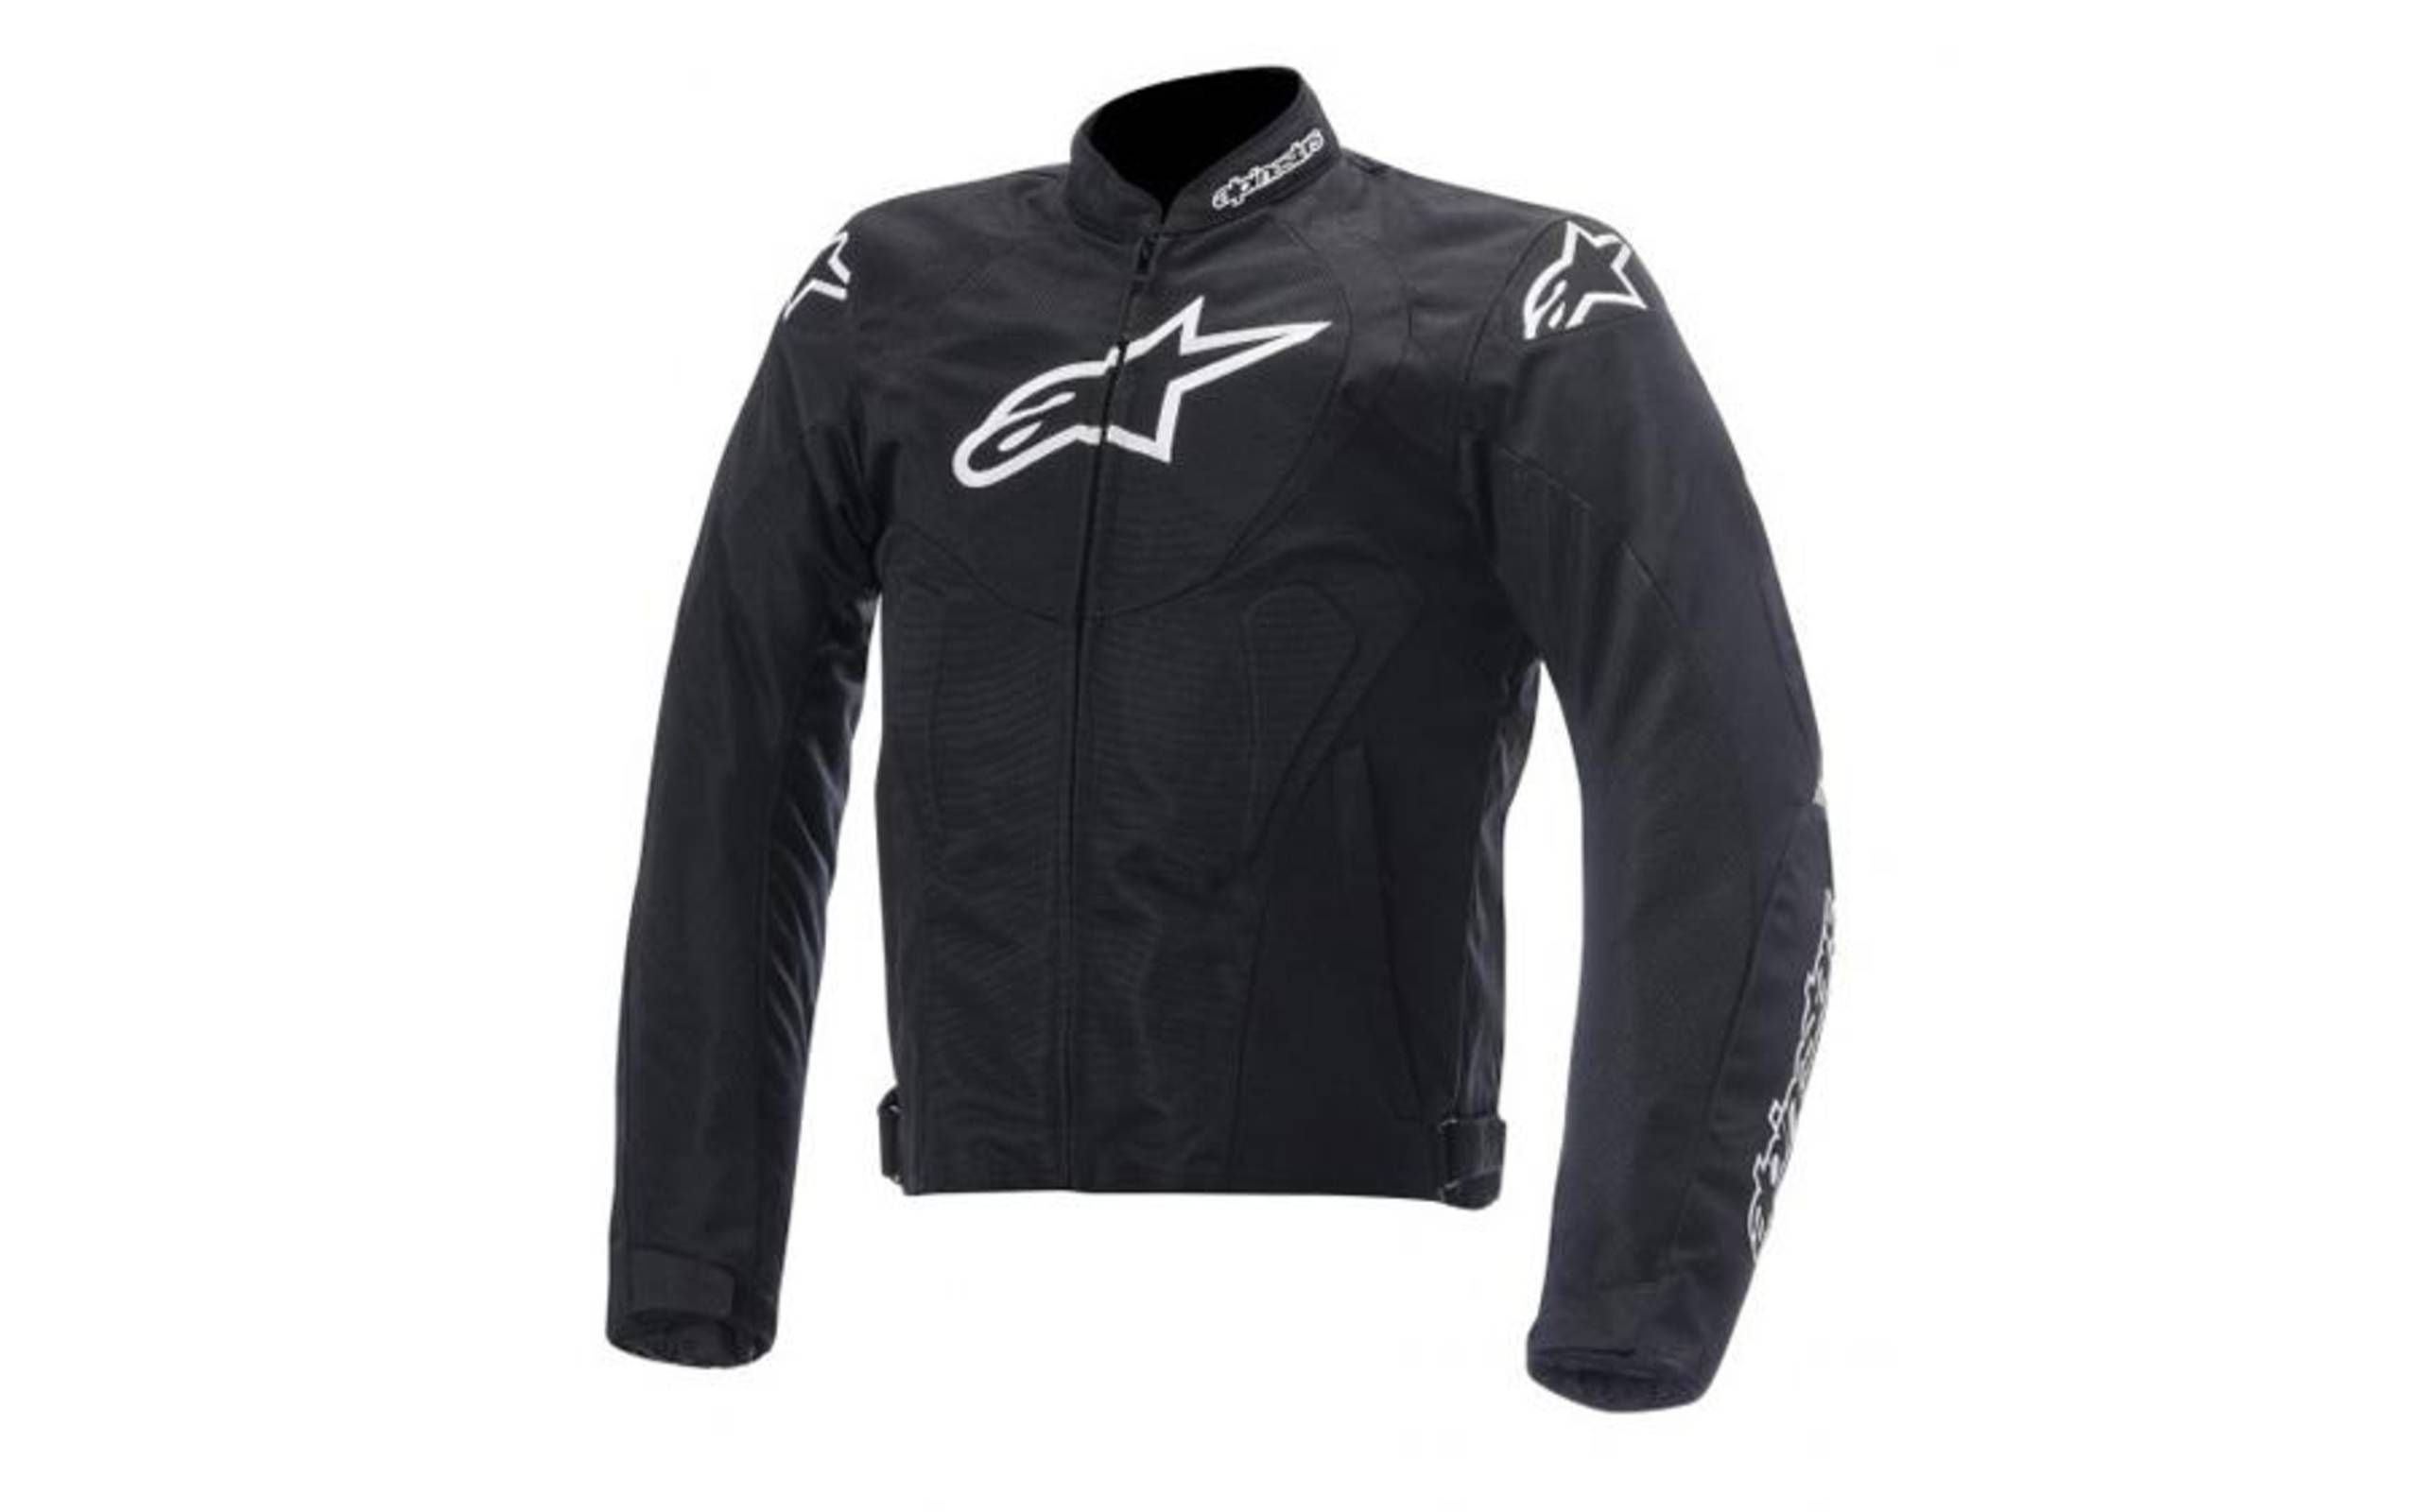 Motorcycle Gear Review: Alpinestars T-Jaws Air Jacket and Oxygen